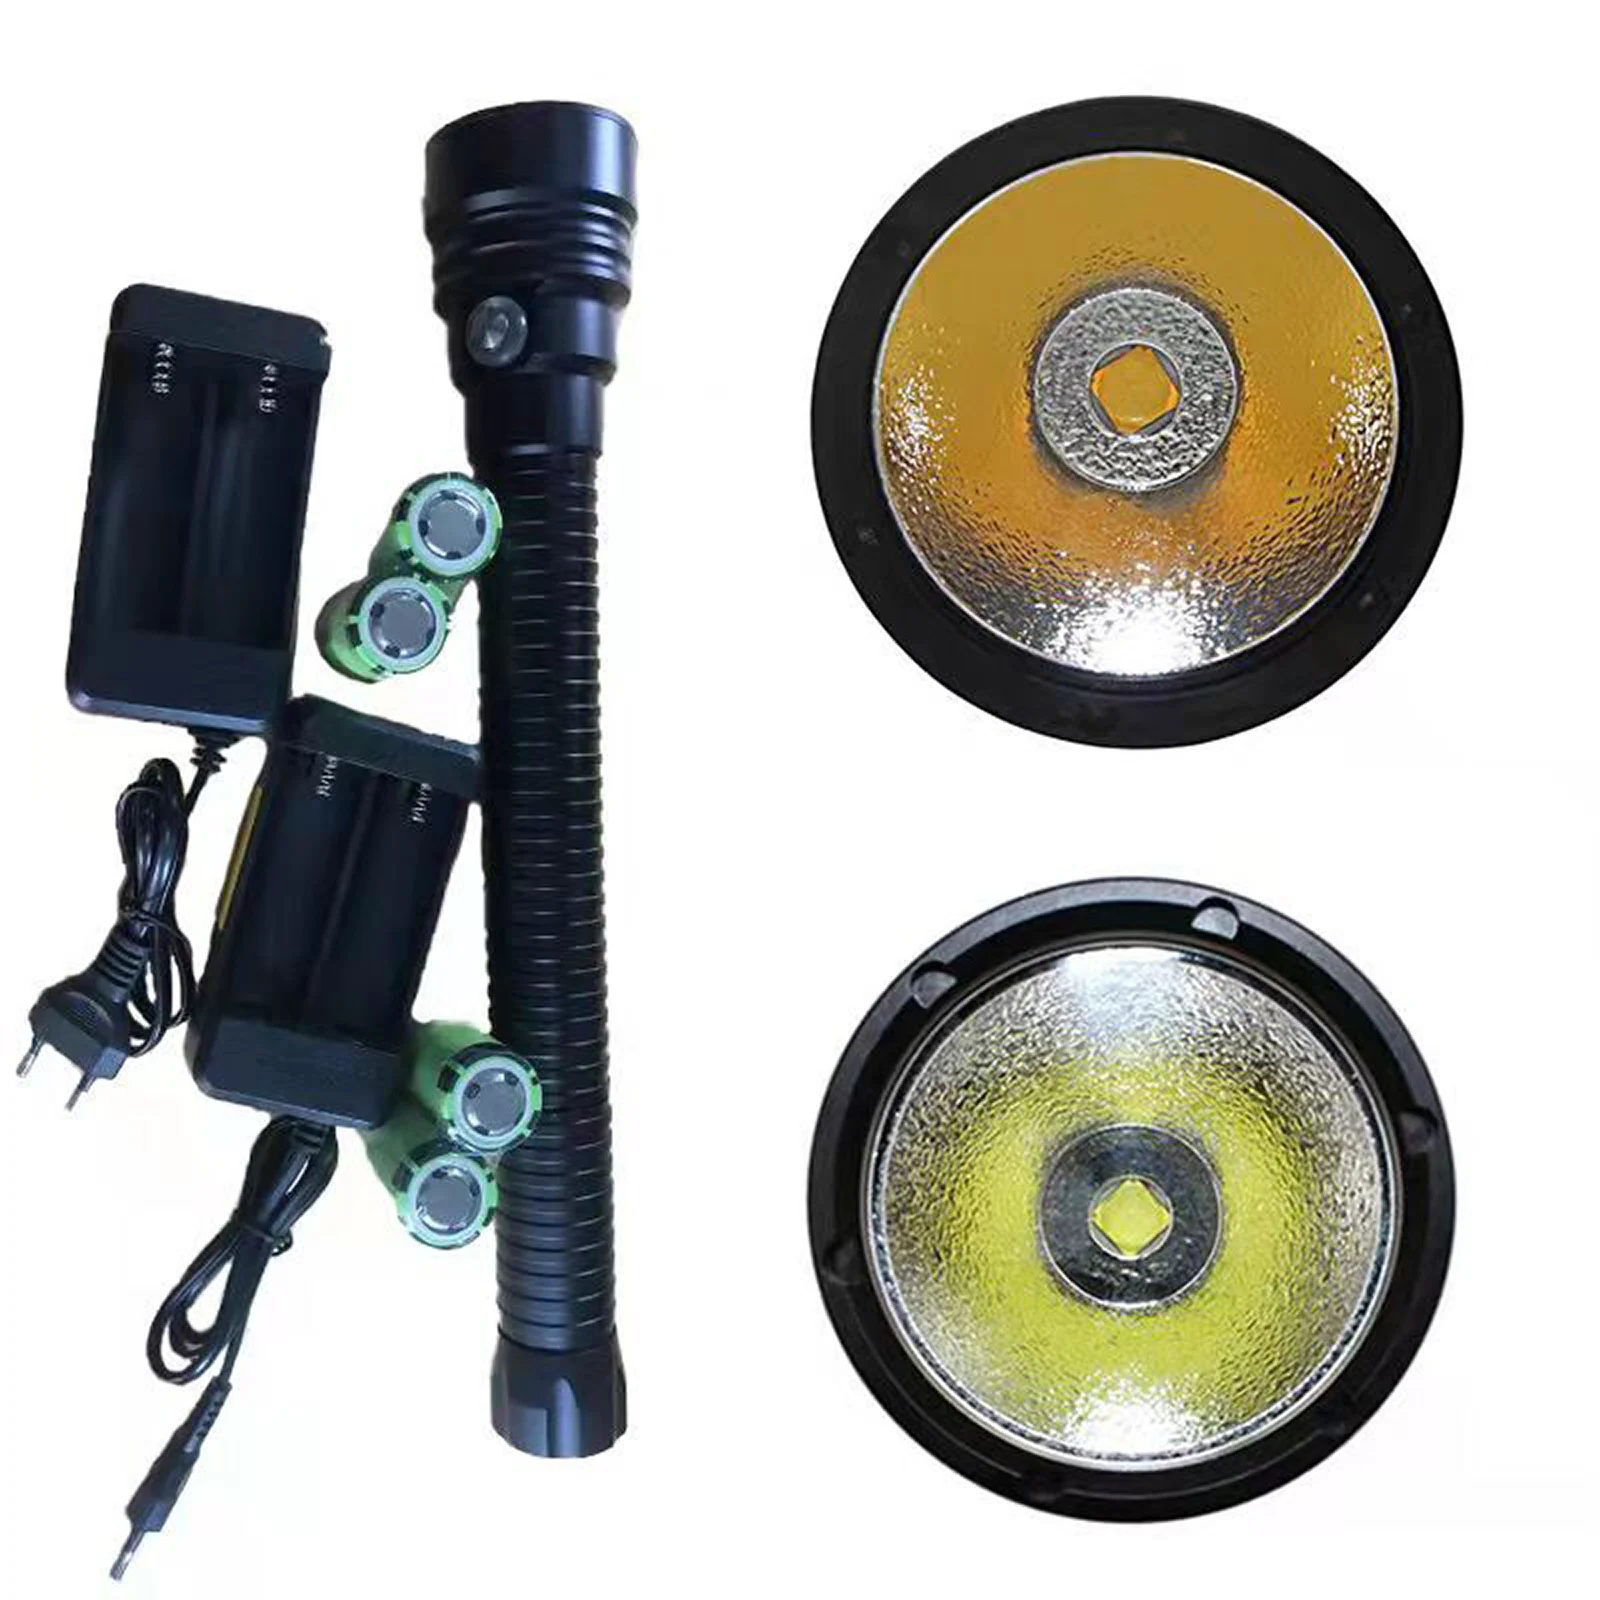 Powerful XHP70.2 led Yellow/White Light 4000 Lumens Diving Flashlight Torch 2/3/4/*26650 battery dive light led underwater xhp70 12v 4000 5000 6000mah lithium ion rechargeable battery suitable for makita cordless power tools